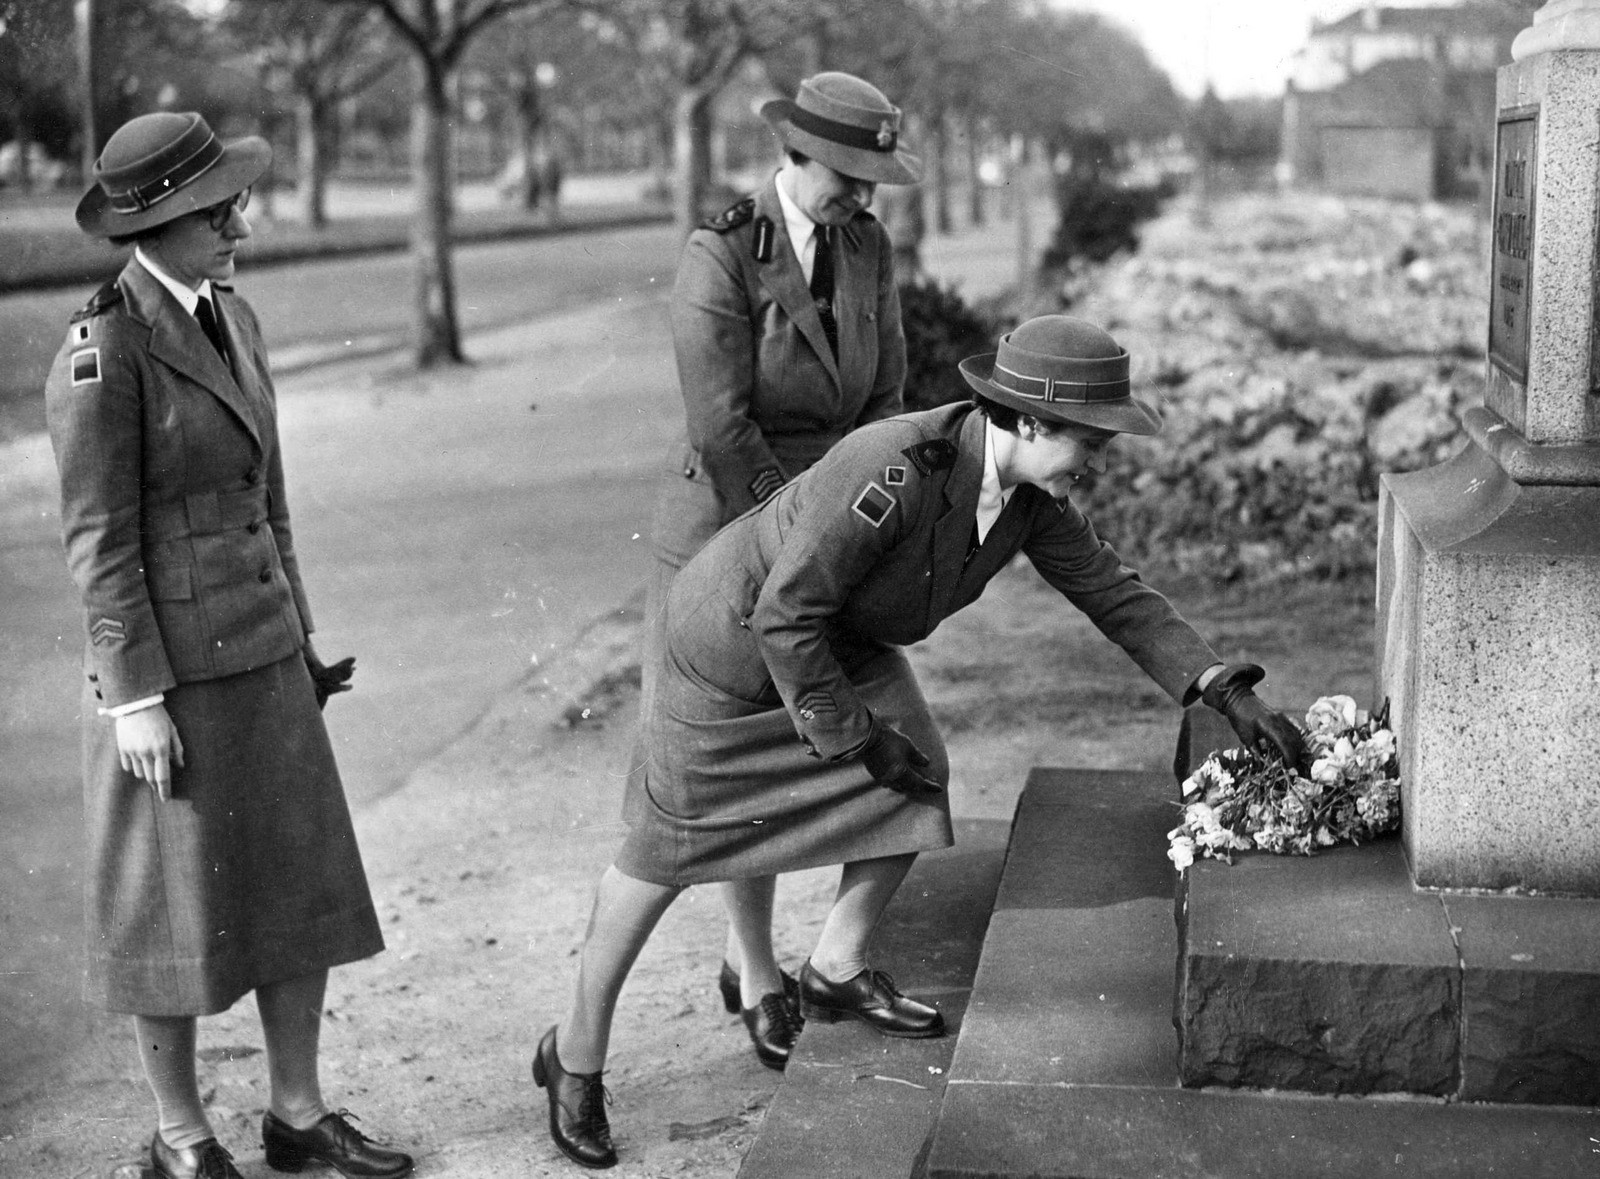 Matron J. Bowe, Sister J. Headberry and Matron A.M. Sage laying flowers on the Edith Cavell Memorial, St. Kilda Road, Melbourne (ca. 1943)